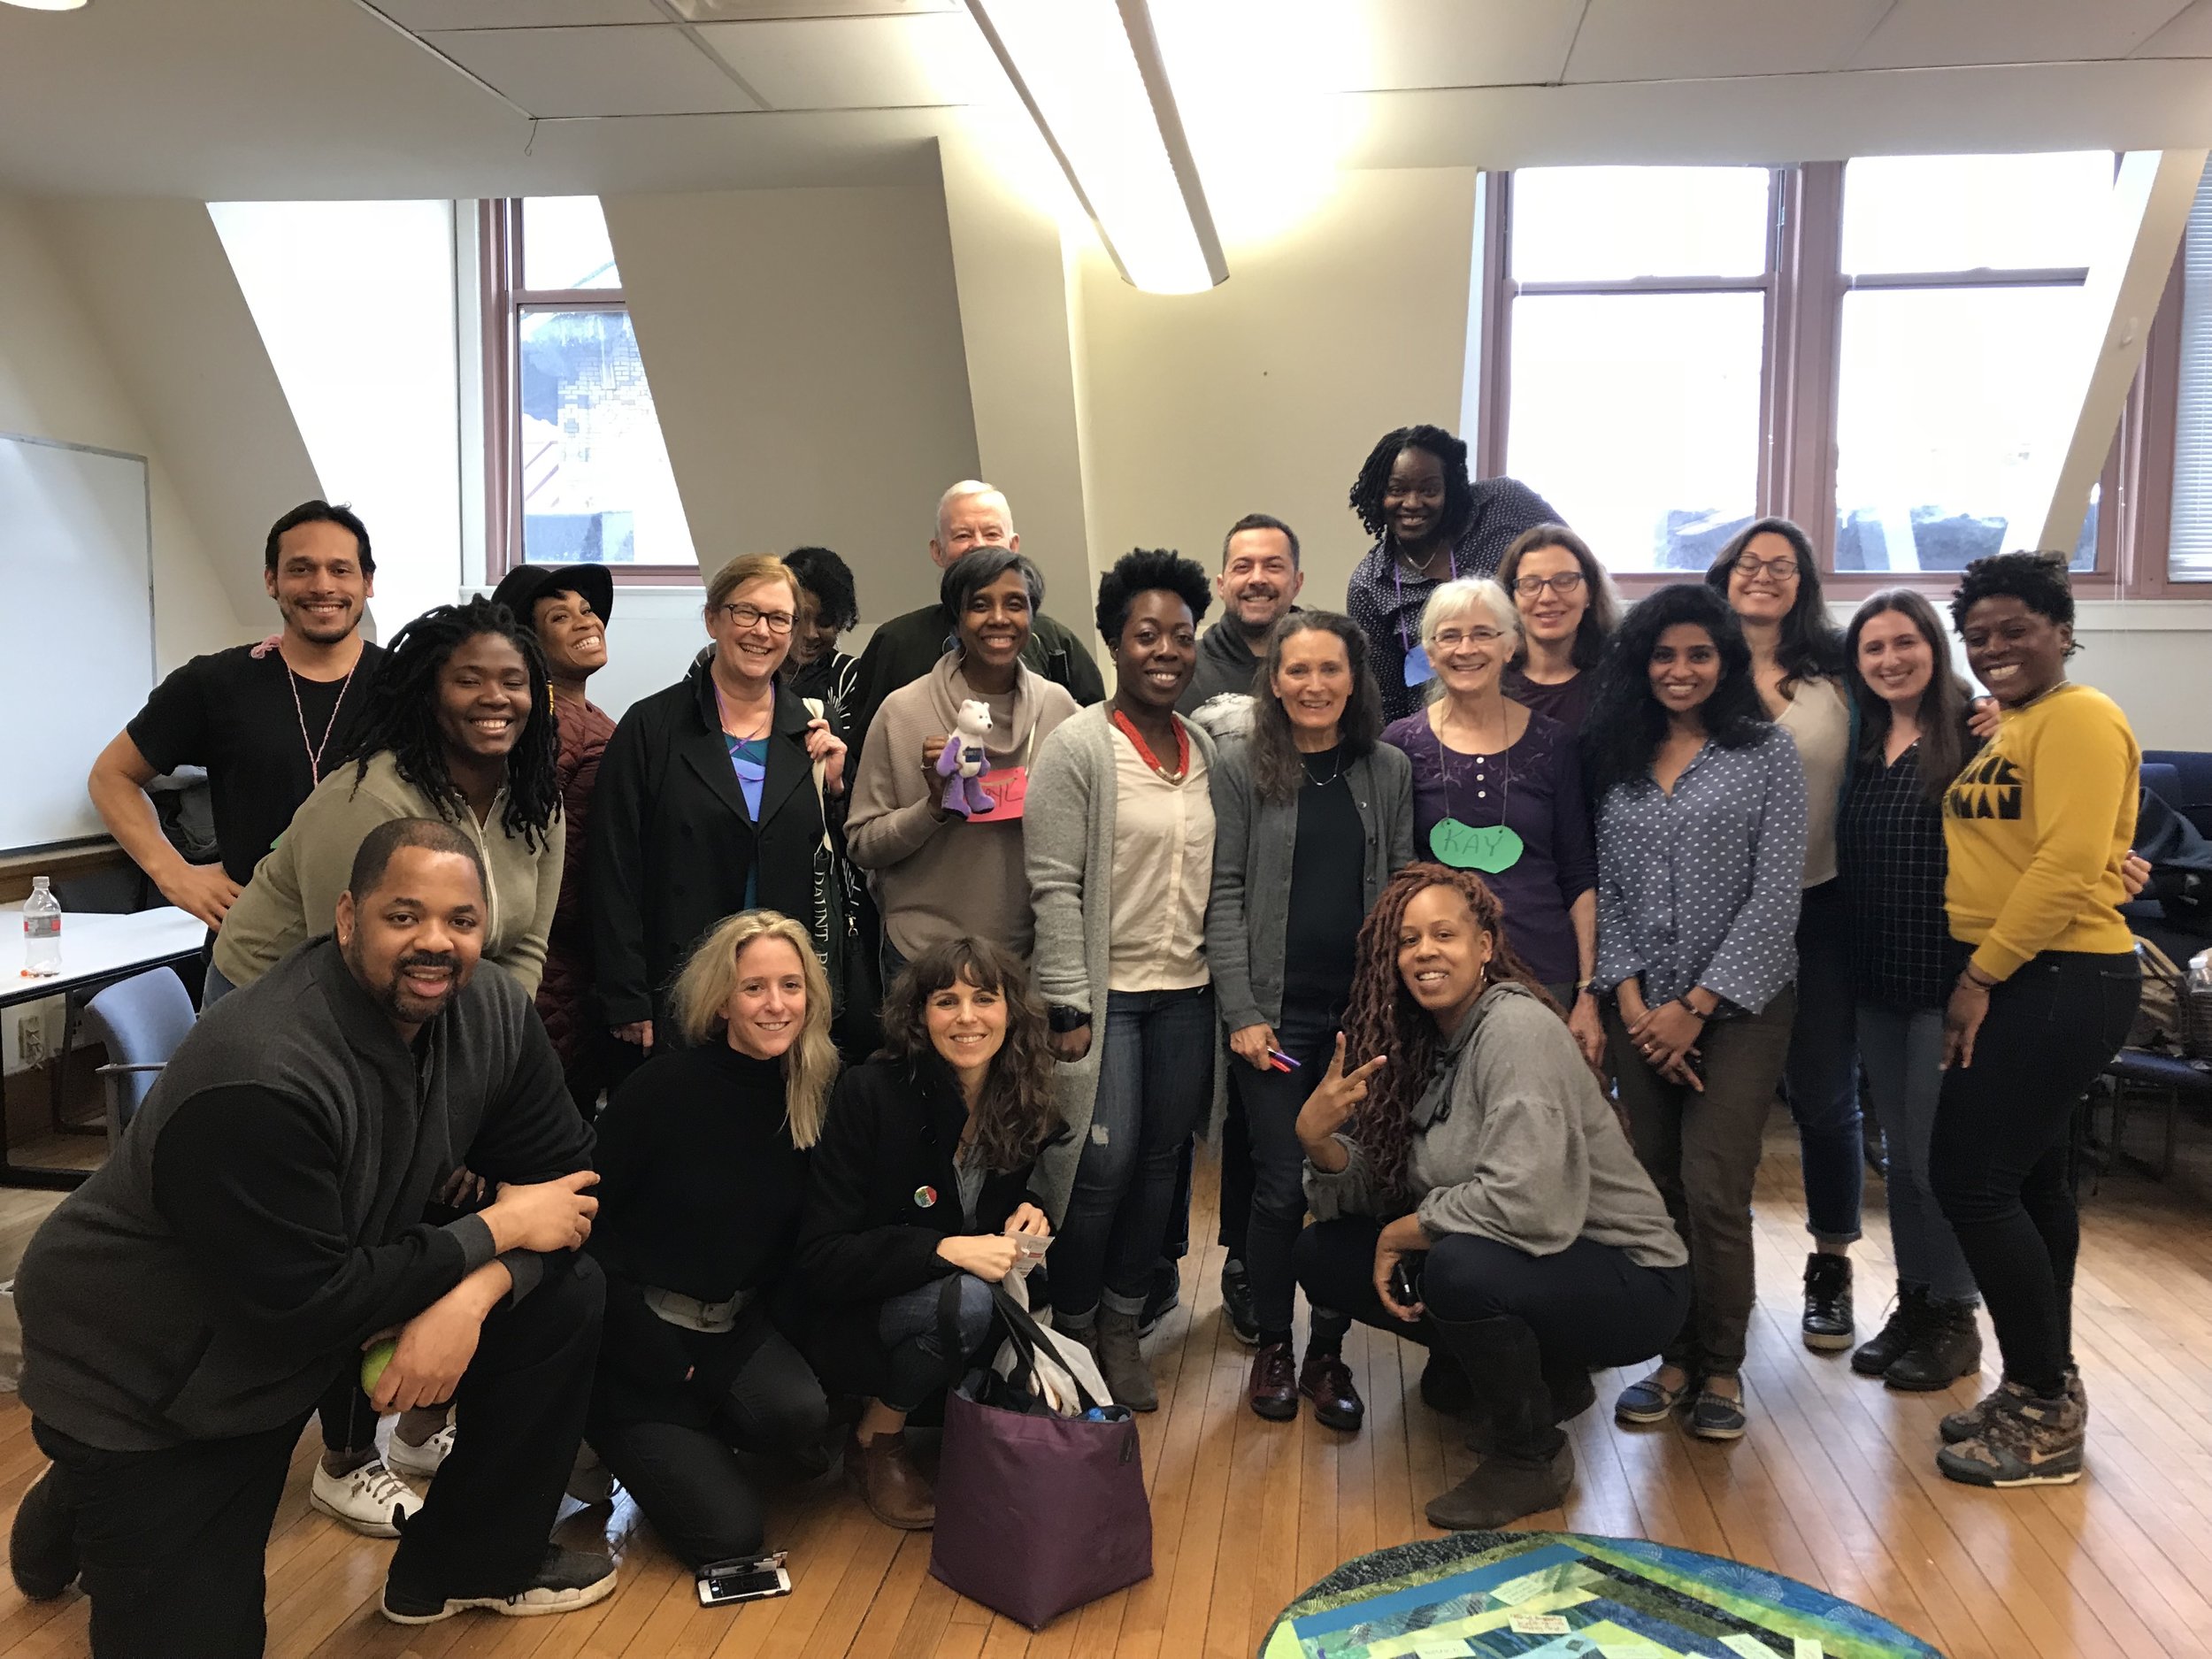  Spent two days at Columbia learning about Circles [a restorative justice practice] while meeting this incredible group of people 